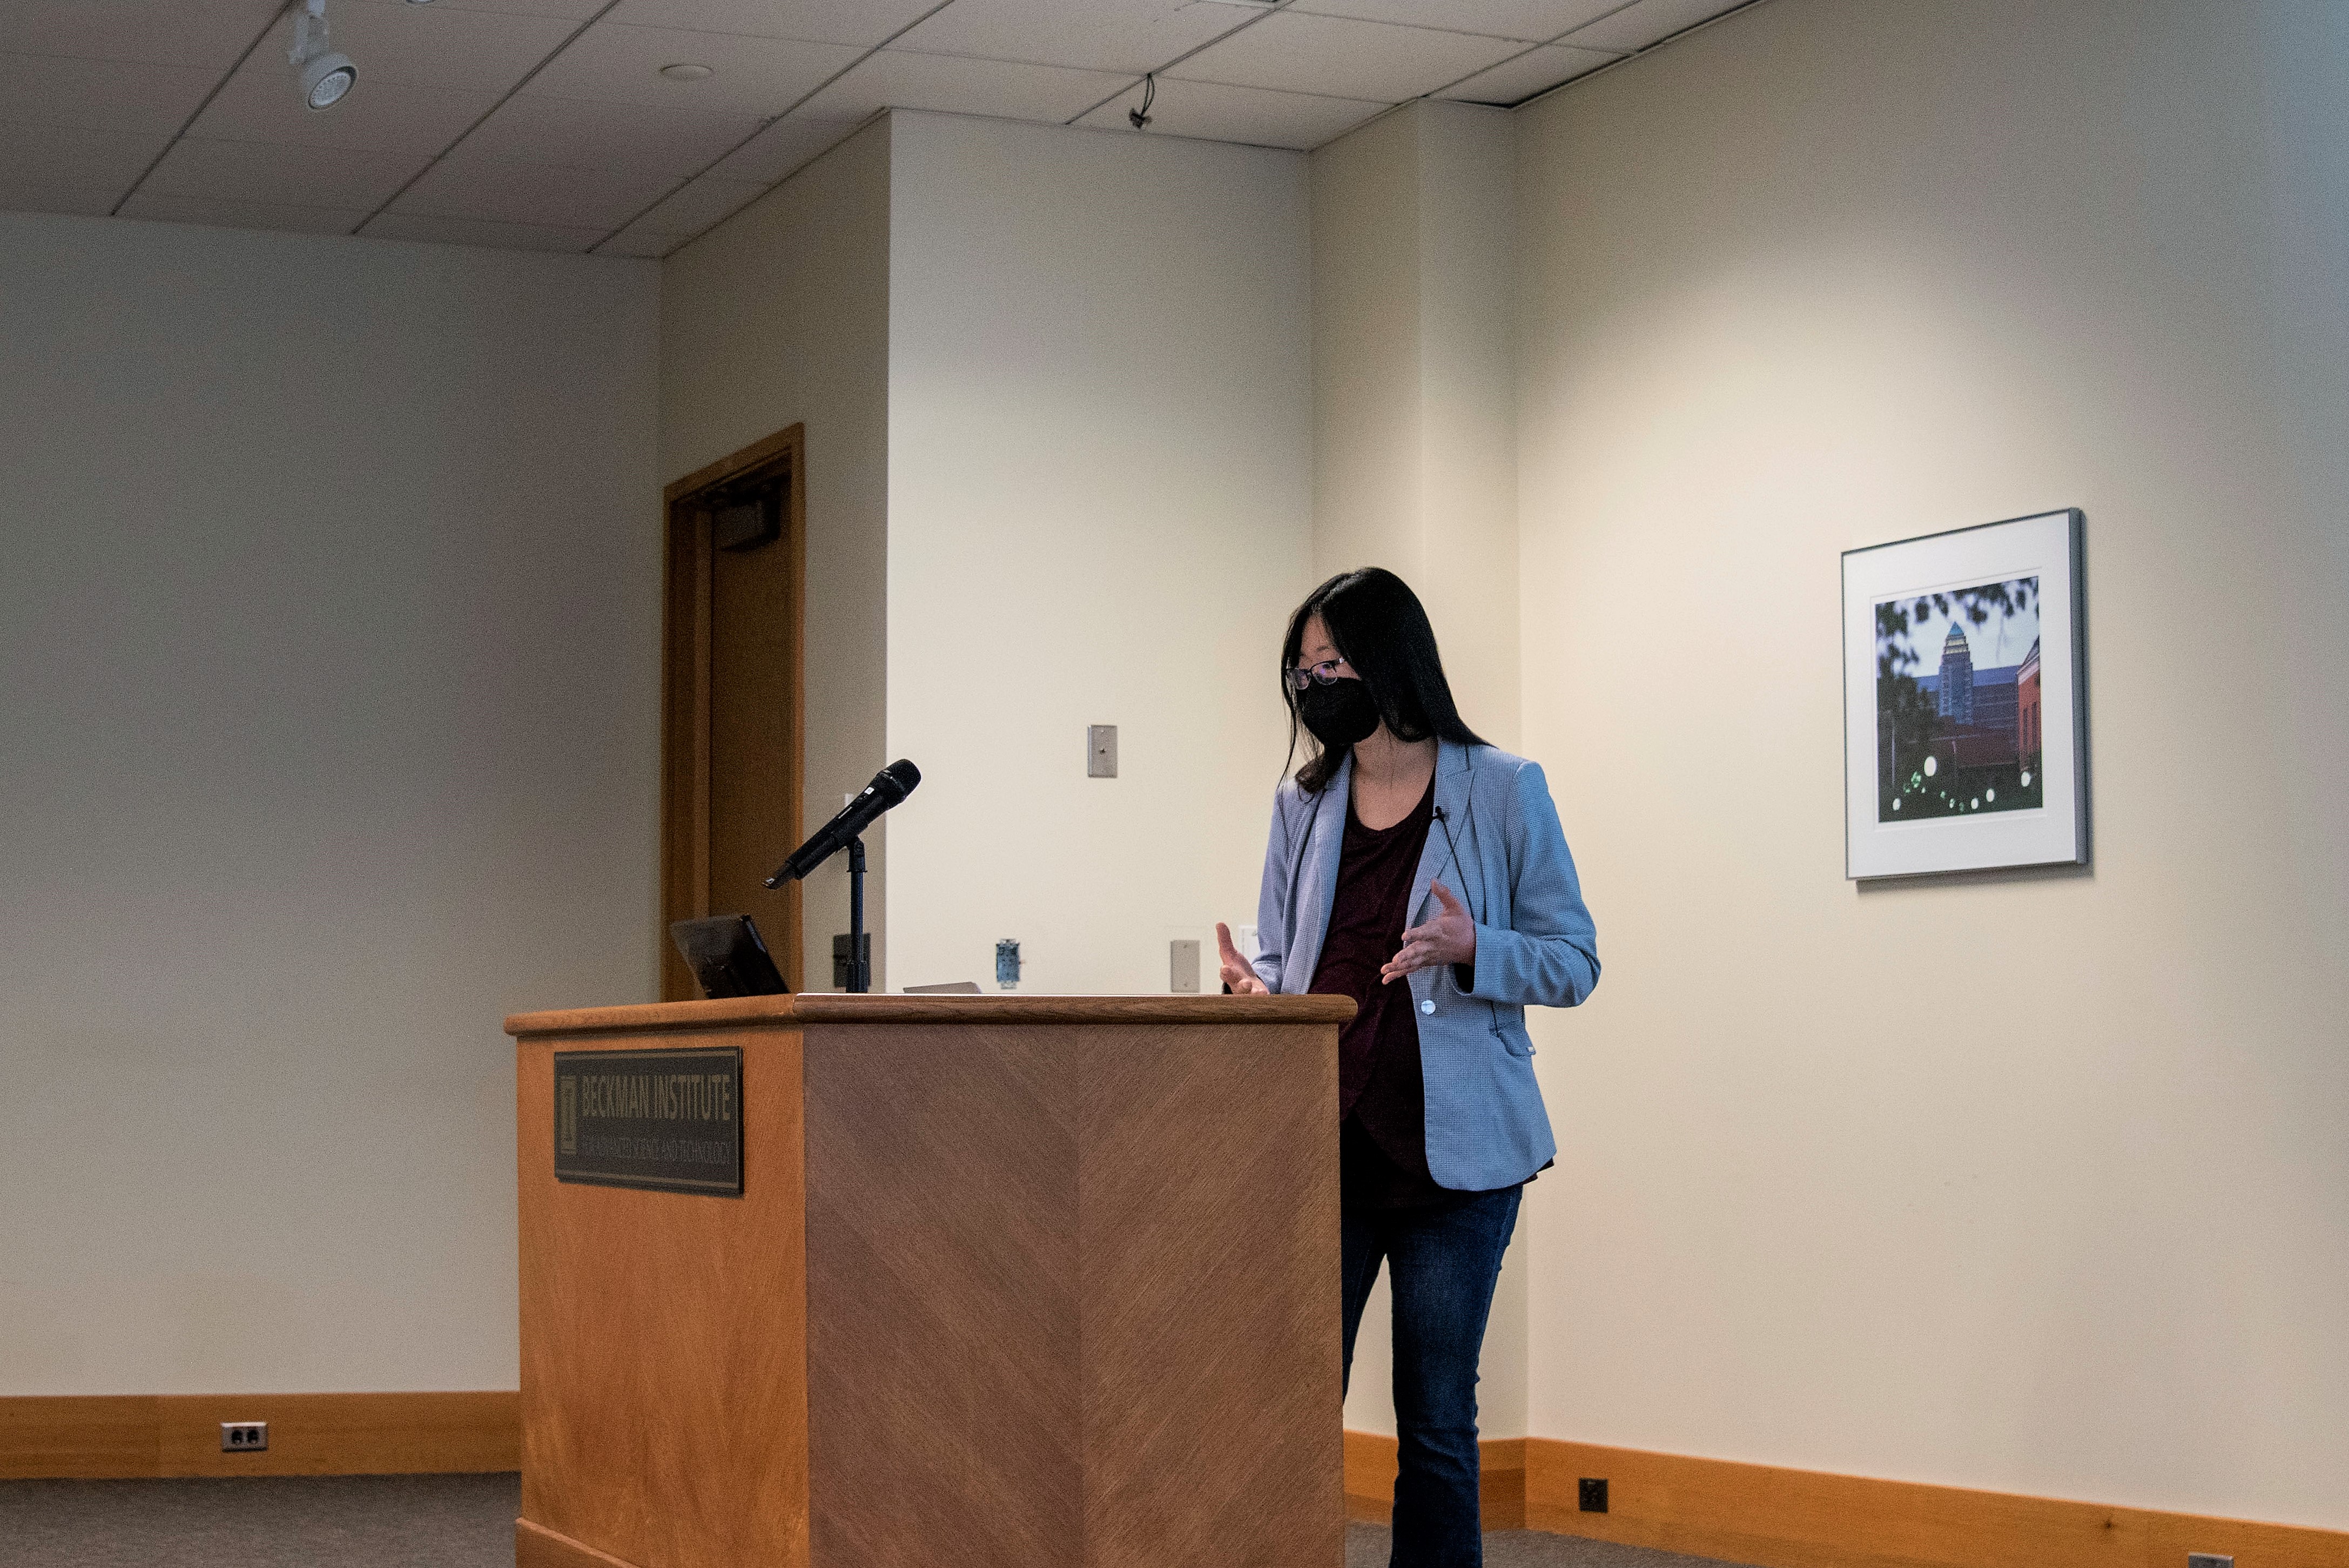 Ying Diao presenting a Director's Seminar in the Beckman Institute conference room.